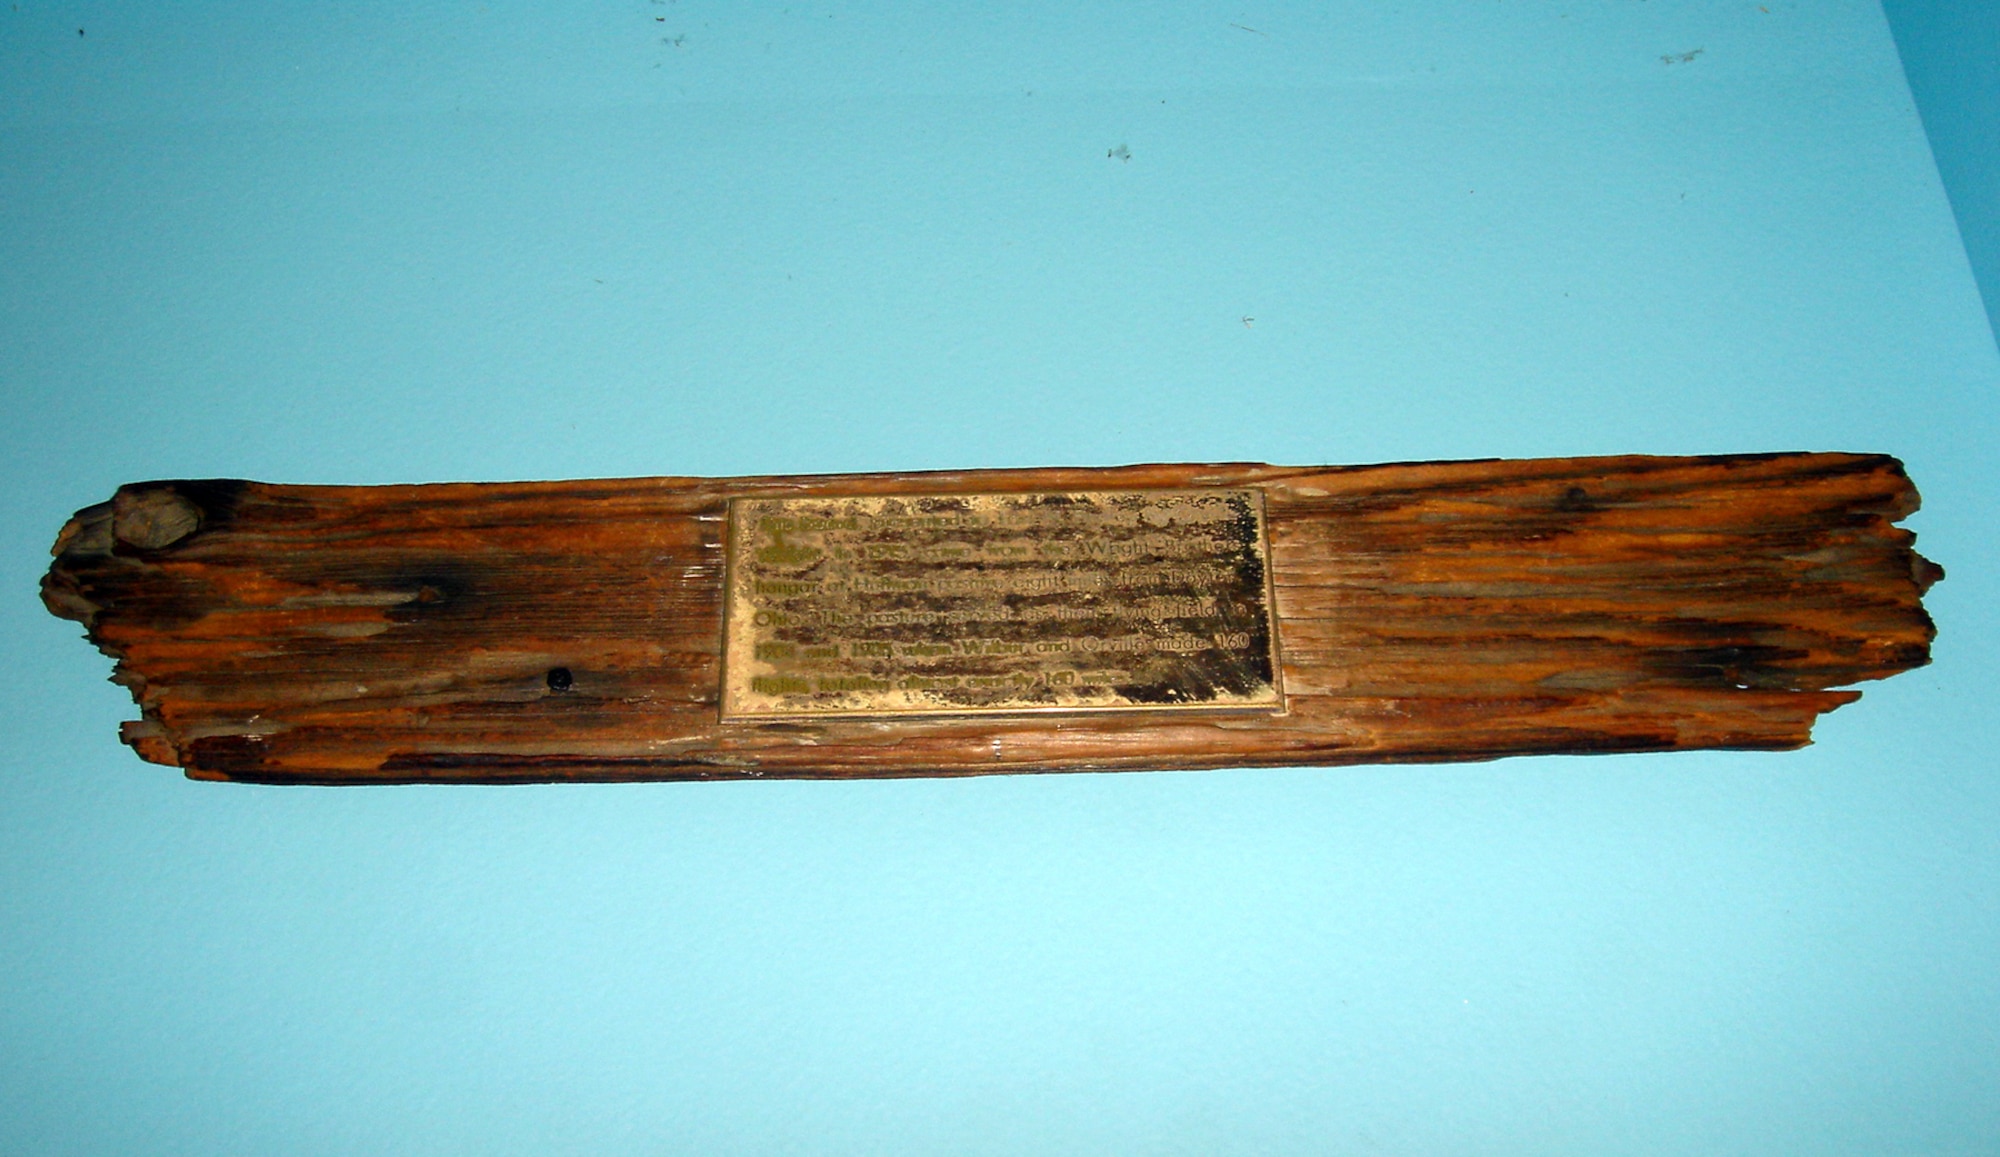 Orville Wright presented this board to Earl N. Finley in 1915. The board came from the Wright brothers' hangar at Huffman Prairie, located eight miles from Dayton, Ohio. Wilbur and Orville Wright made 160 flights while using Huffman Prairie as a flying field in 1904-1905. (U.S. Air Force photo)